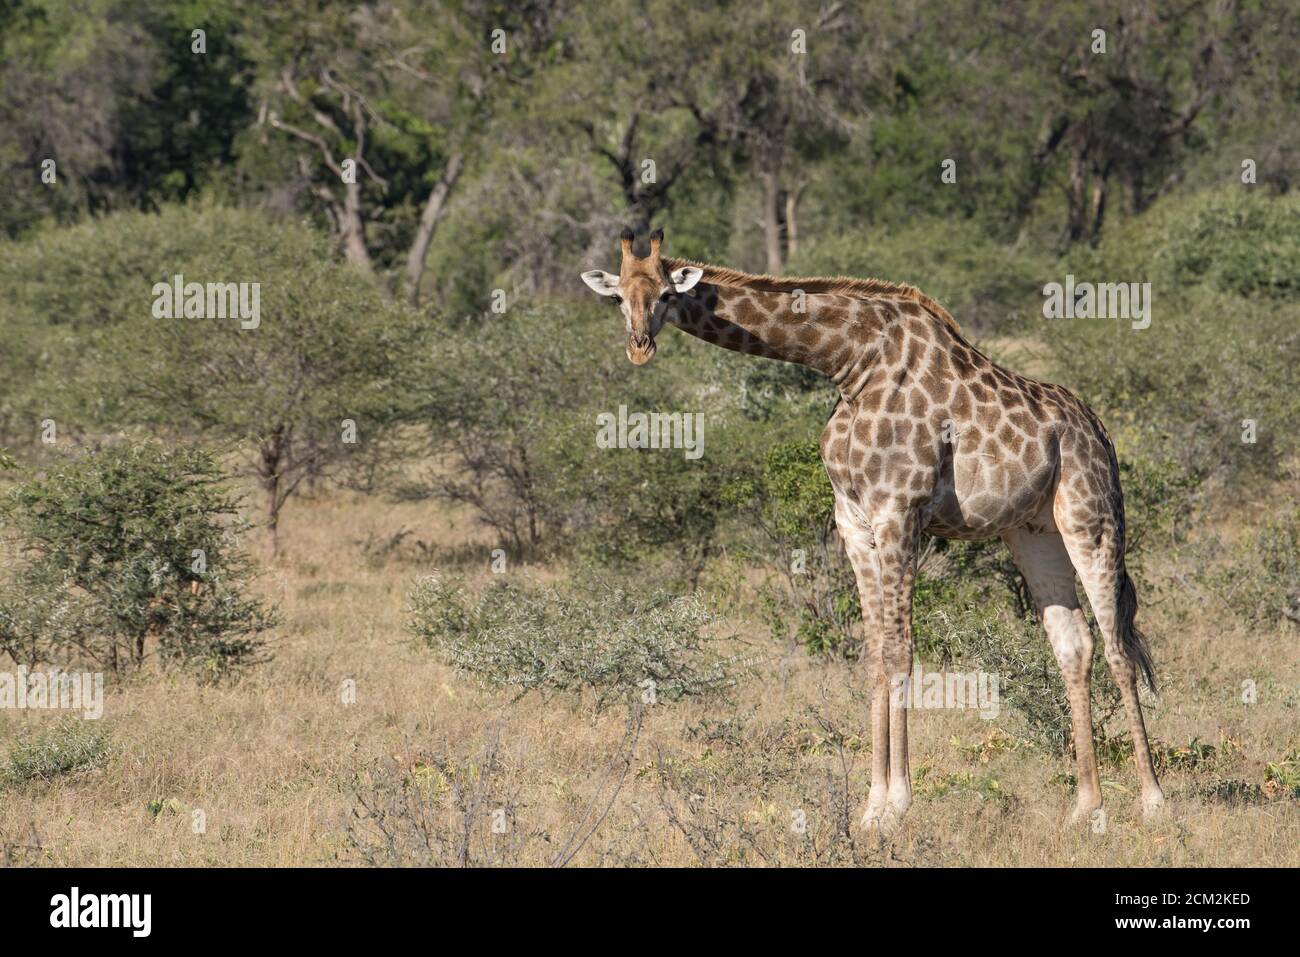 Young wild giraffe with head and neck downward faces camera  in the Greater Kruger wilderness. Horizontal landscape image. Stock Photo